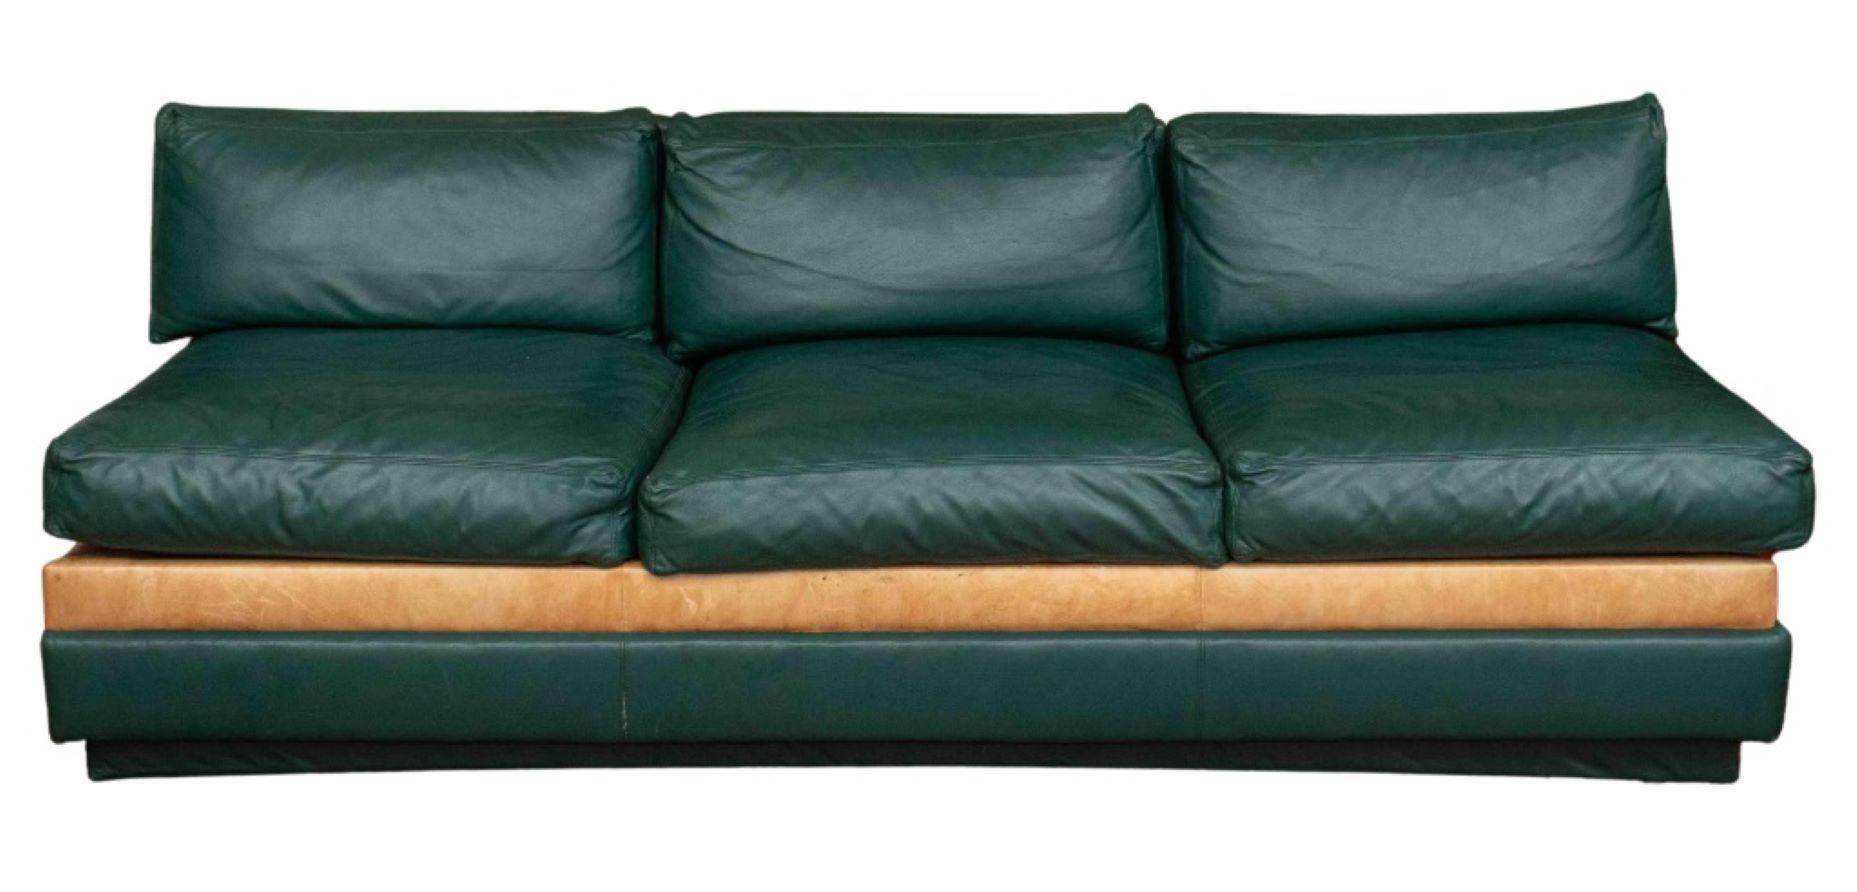 Modern Leather Sleeper Sectional Sofa In Good Condition For Sale In New York, NY